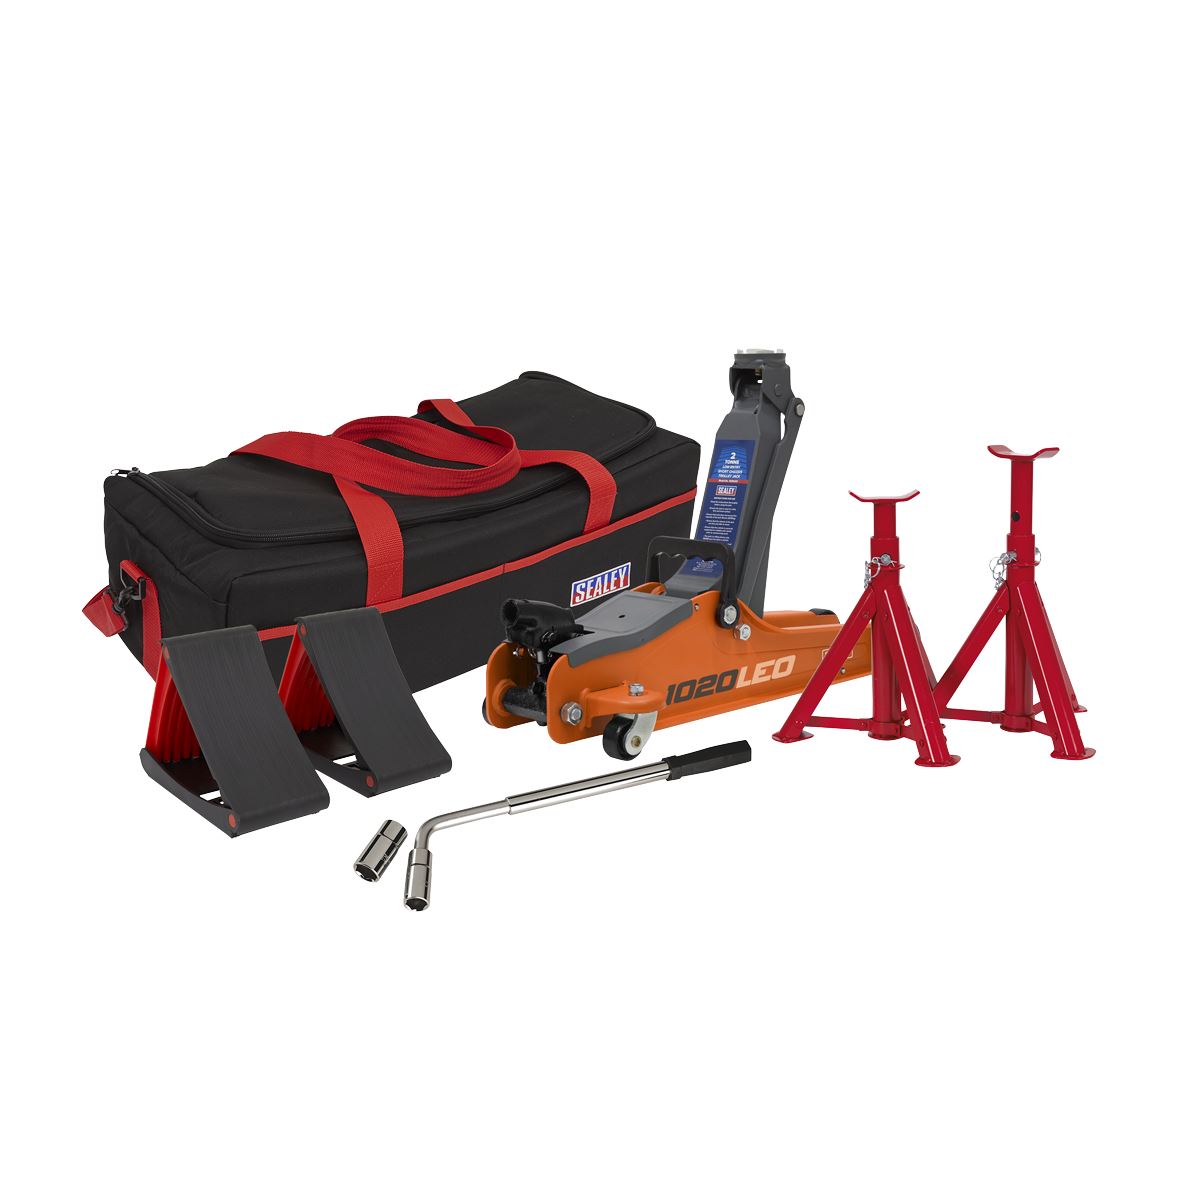 Sealey Low Entry Short Chassis Trolley Jack & Accessories Bag Combo 2 Tonne - Orange